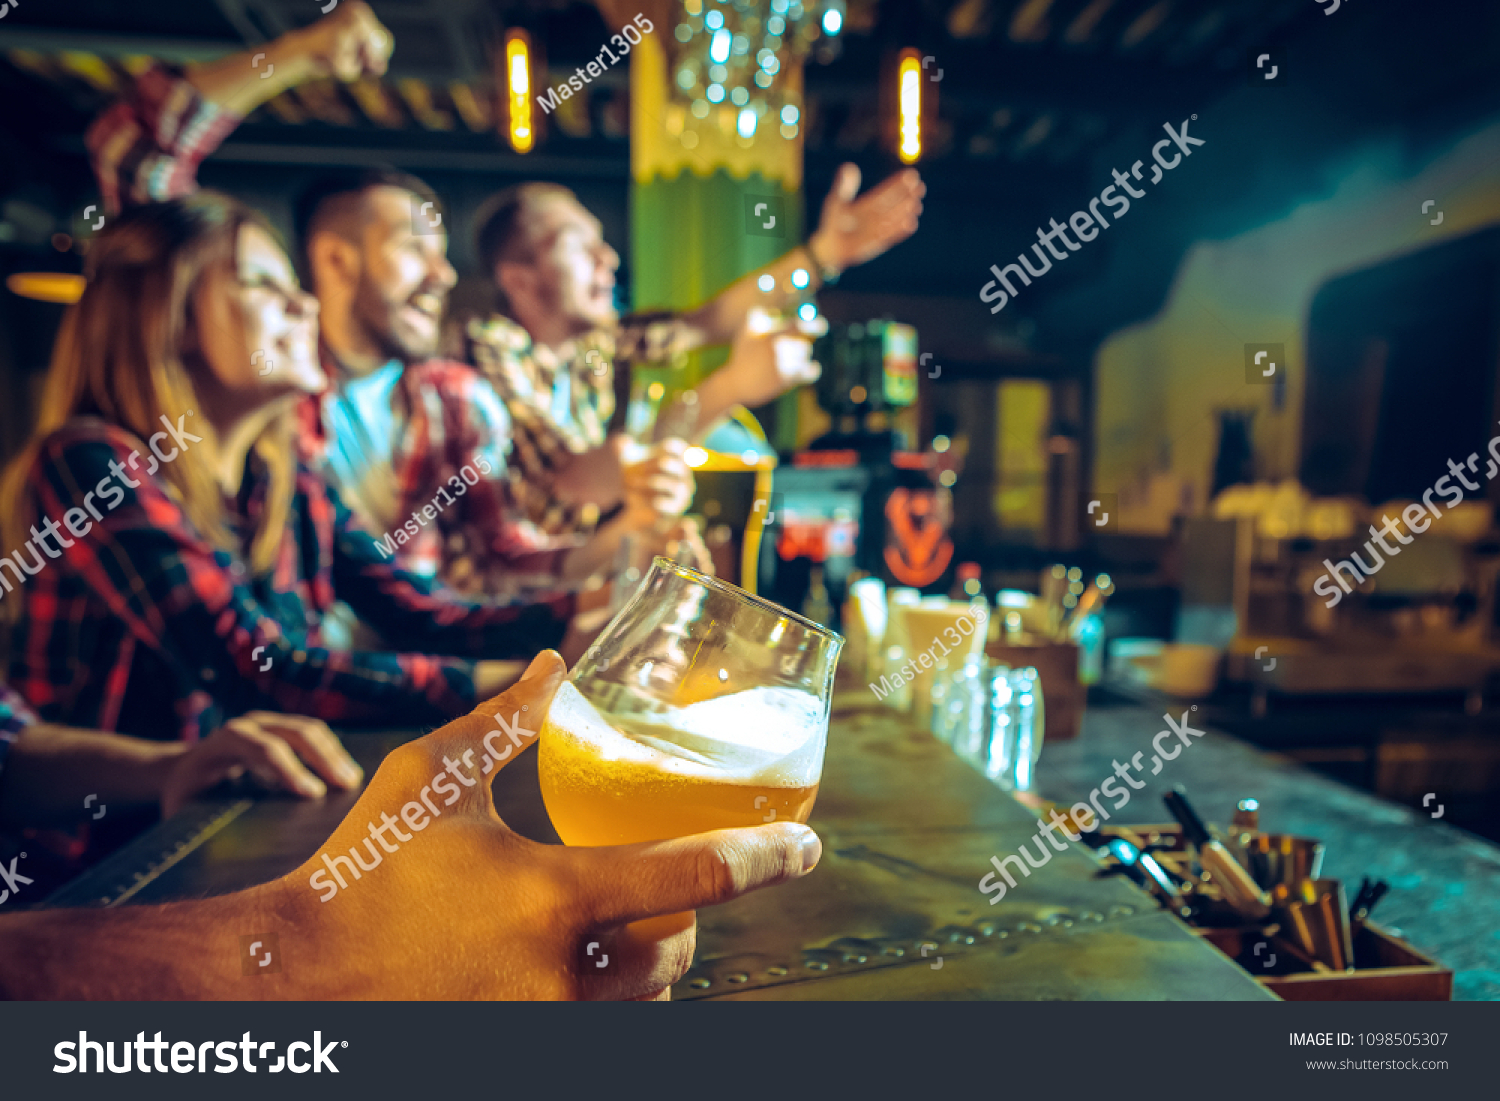 Sport, people, leisure, friendship, entertainment concept - happy male and female football fans or good yuong friends drinking beer, celebrating victory at bar or pub. Human positive emotions concept #1098505307